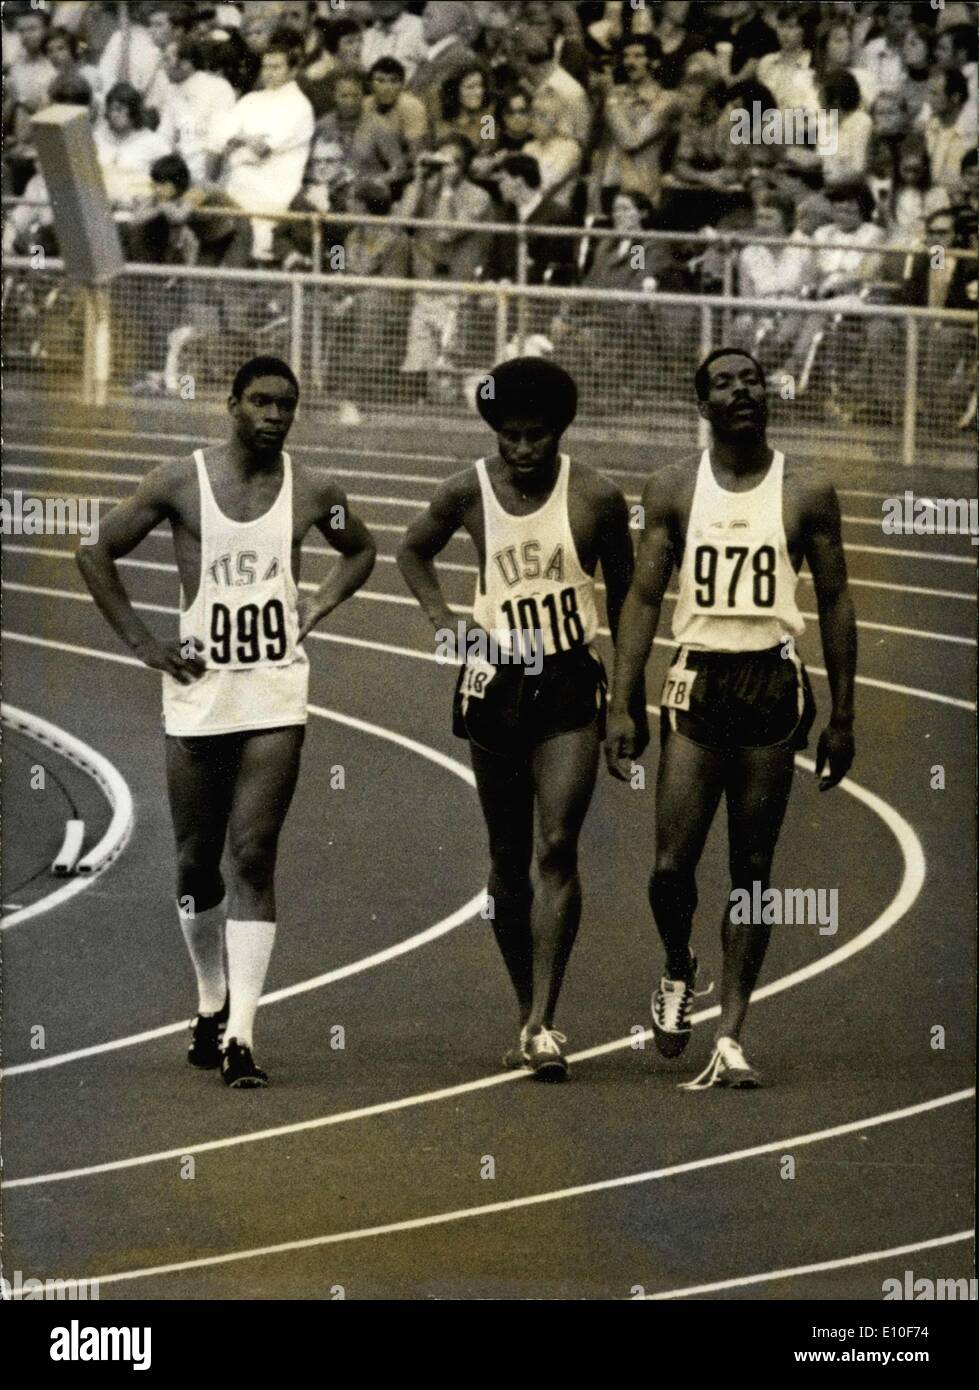 Sep. 08, 1972 - After Vincent Matthews won the 400 meter race in front Wayne Collet, the two athletes illicited a liely reaction from the public. On the podium, during America's national anthem, they turned their backs and talked. The crowd booed them as they left the podium. From left to right, after the race, Vincent Matthews (1st), Smith, and Collett (2nd) Stock Photo